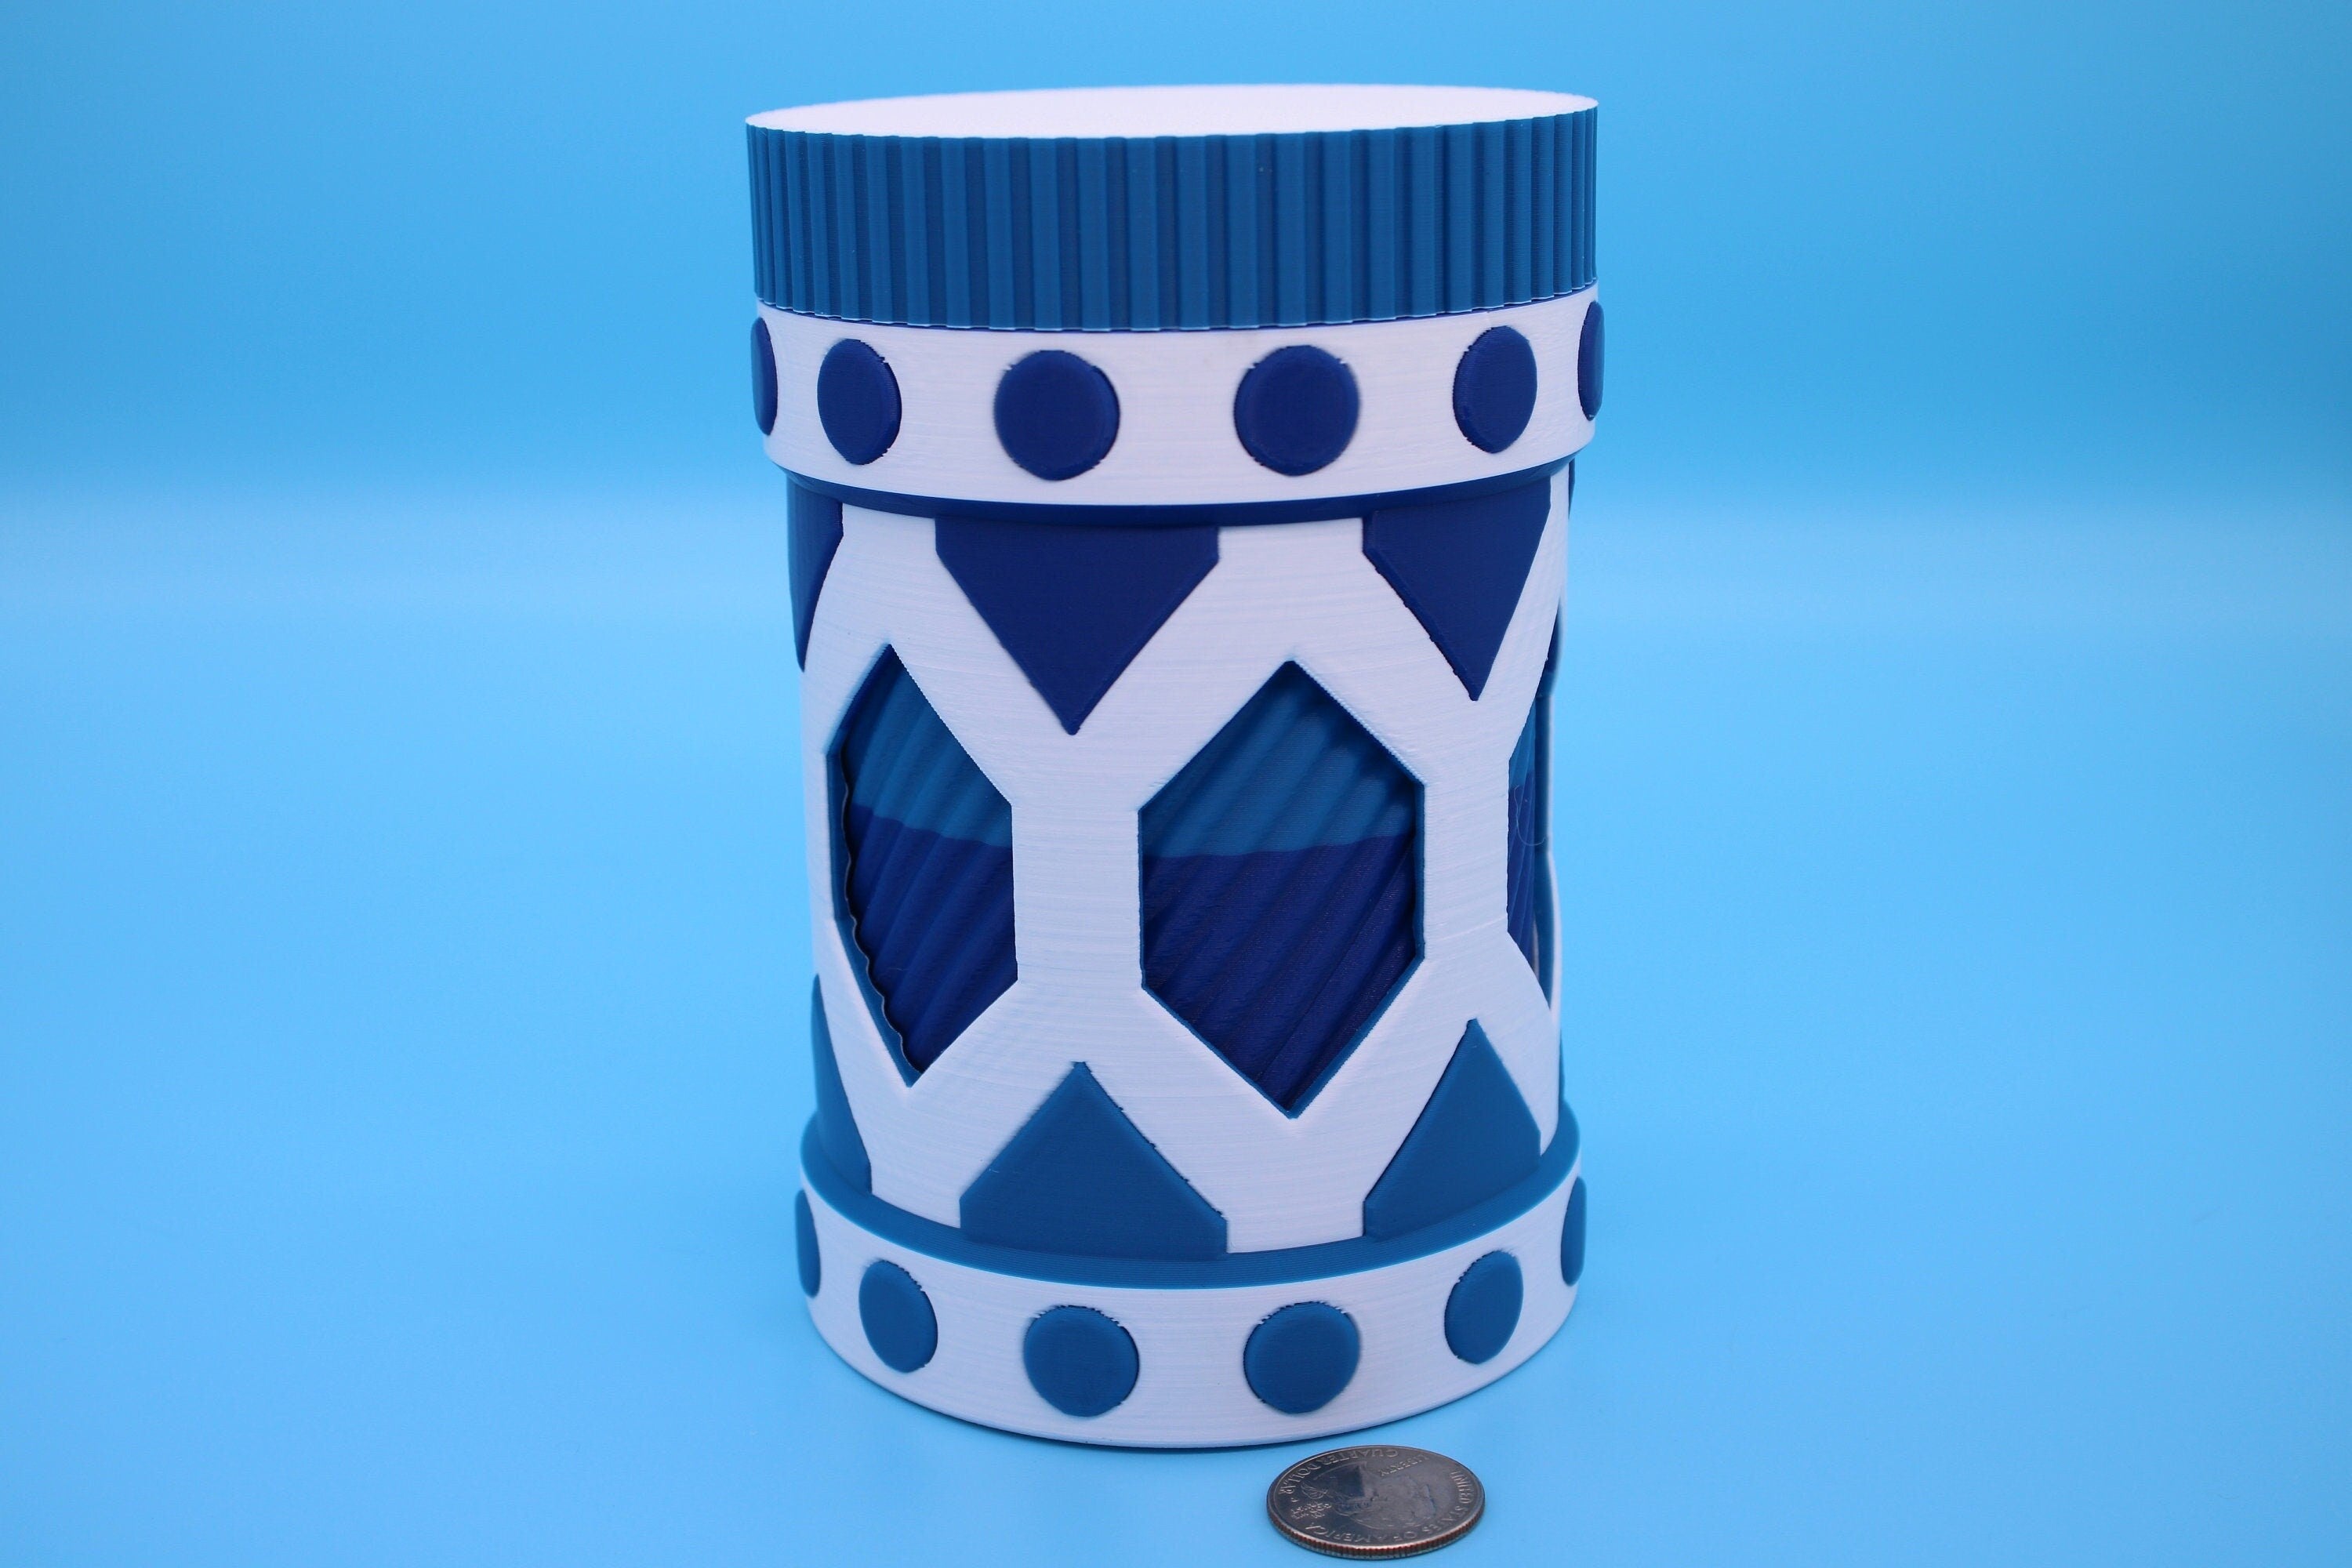 Twist to lock storage container. Multi Blue and White. 3D Printed. Stash your favorite trinkets, cash, and more., Looks Amazing on display.